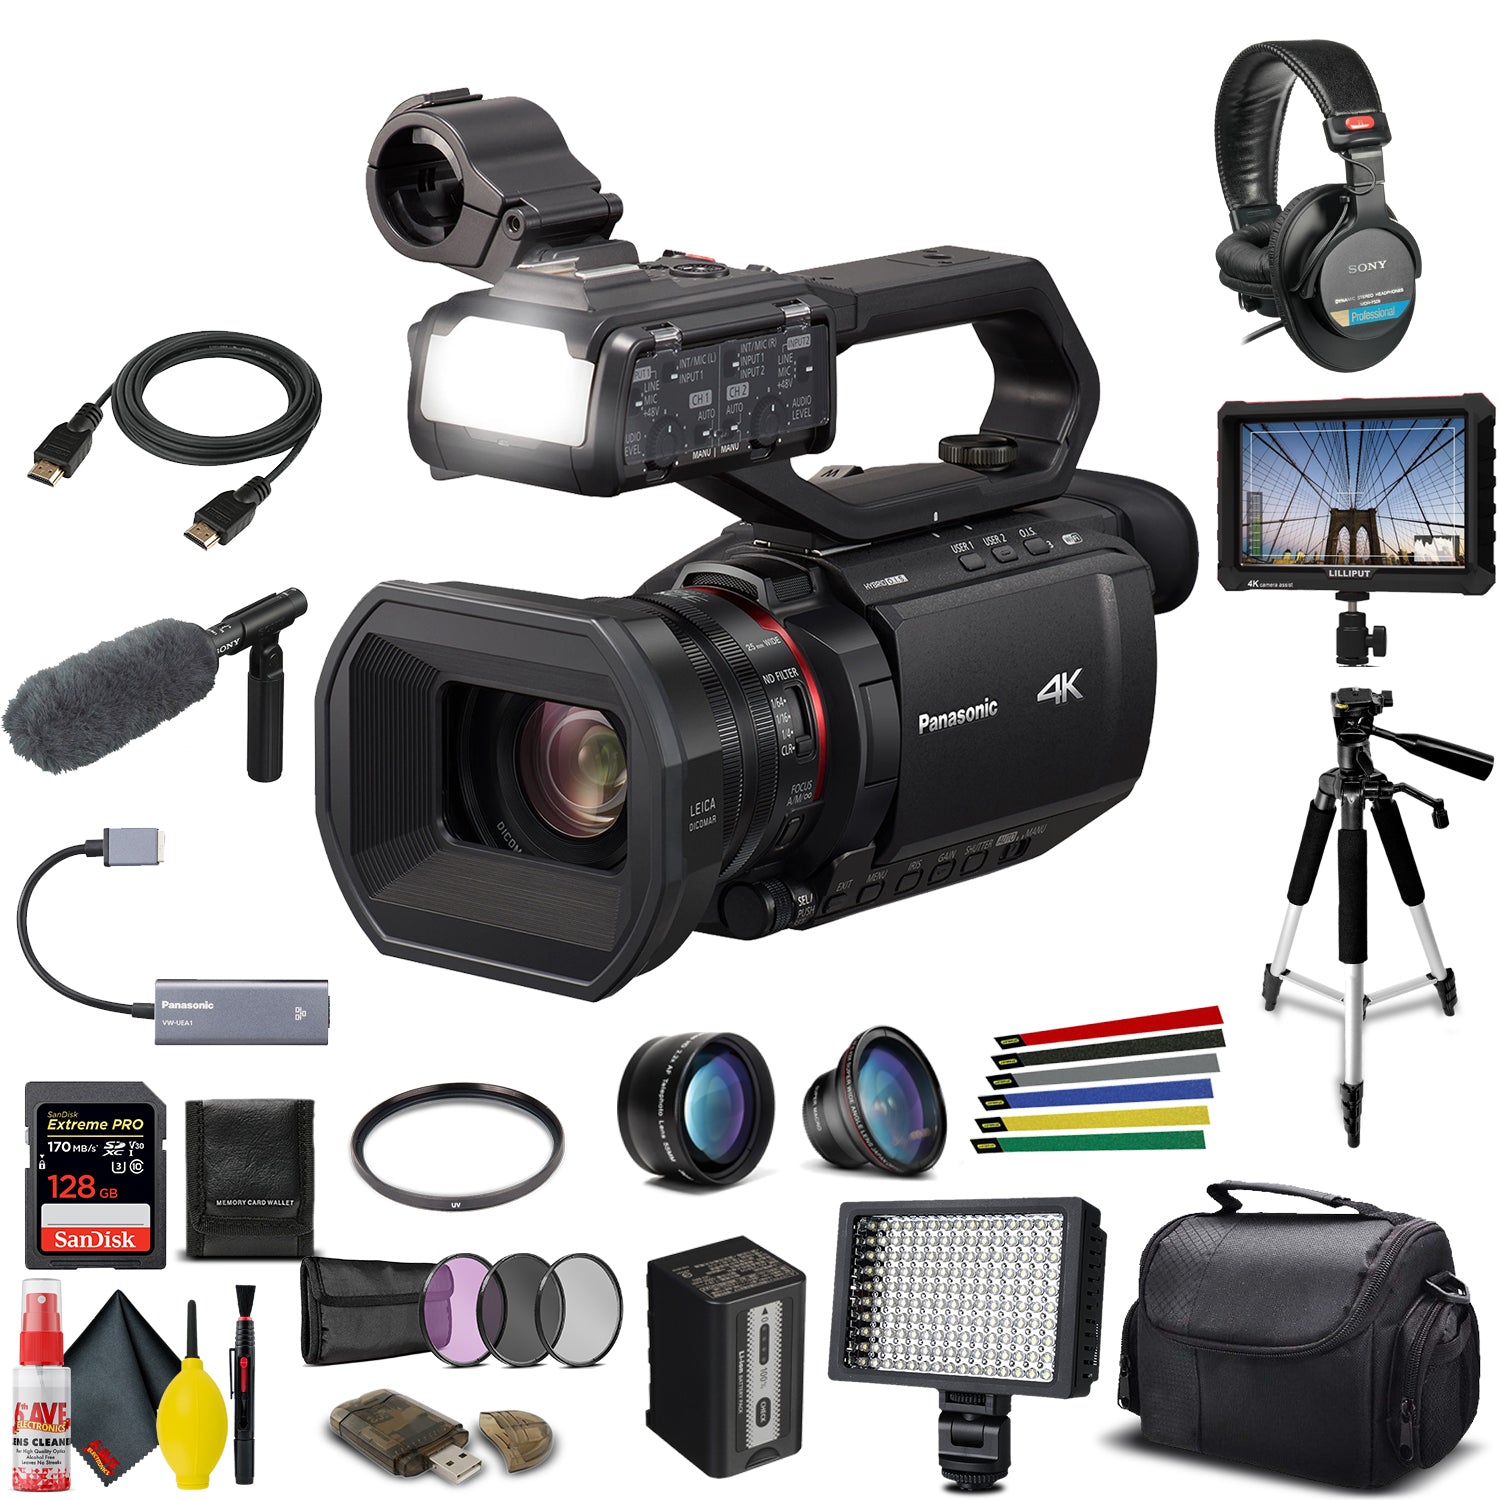 Panasonic AG-CX10 4K Camcorder with NDI/HX + Padded Case, Sandisk Extreme Pro 128 GB Memory Card, Tripod, Lens Filters, Sony Headphones, Sony Mic, External 4K Monitor, Wire Straps, LED Light, And More